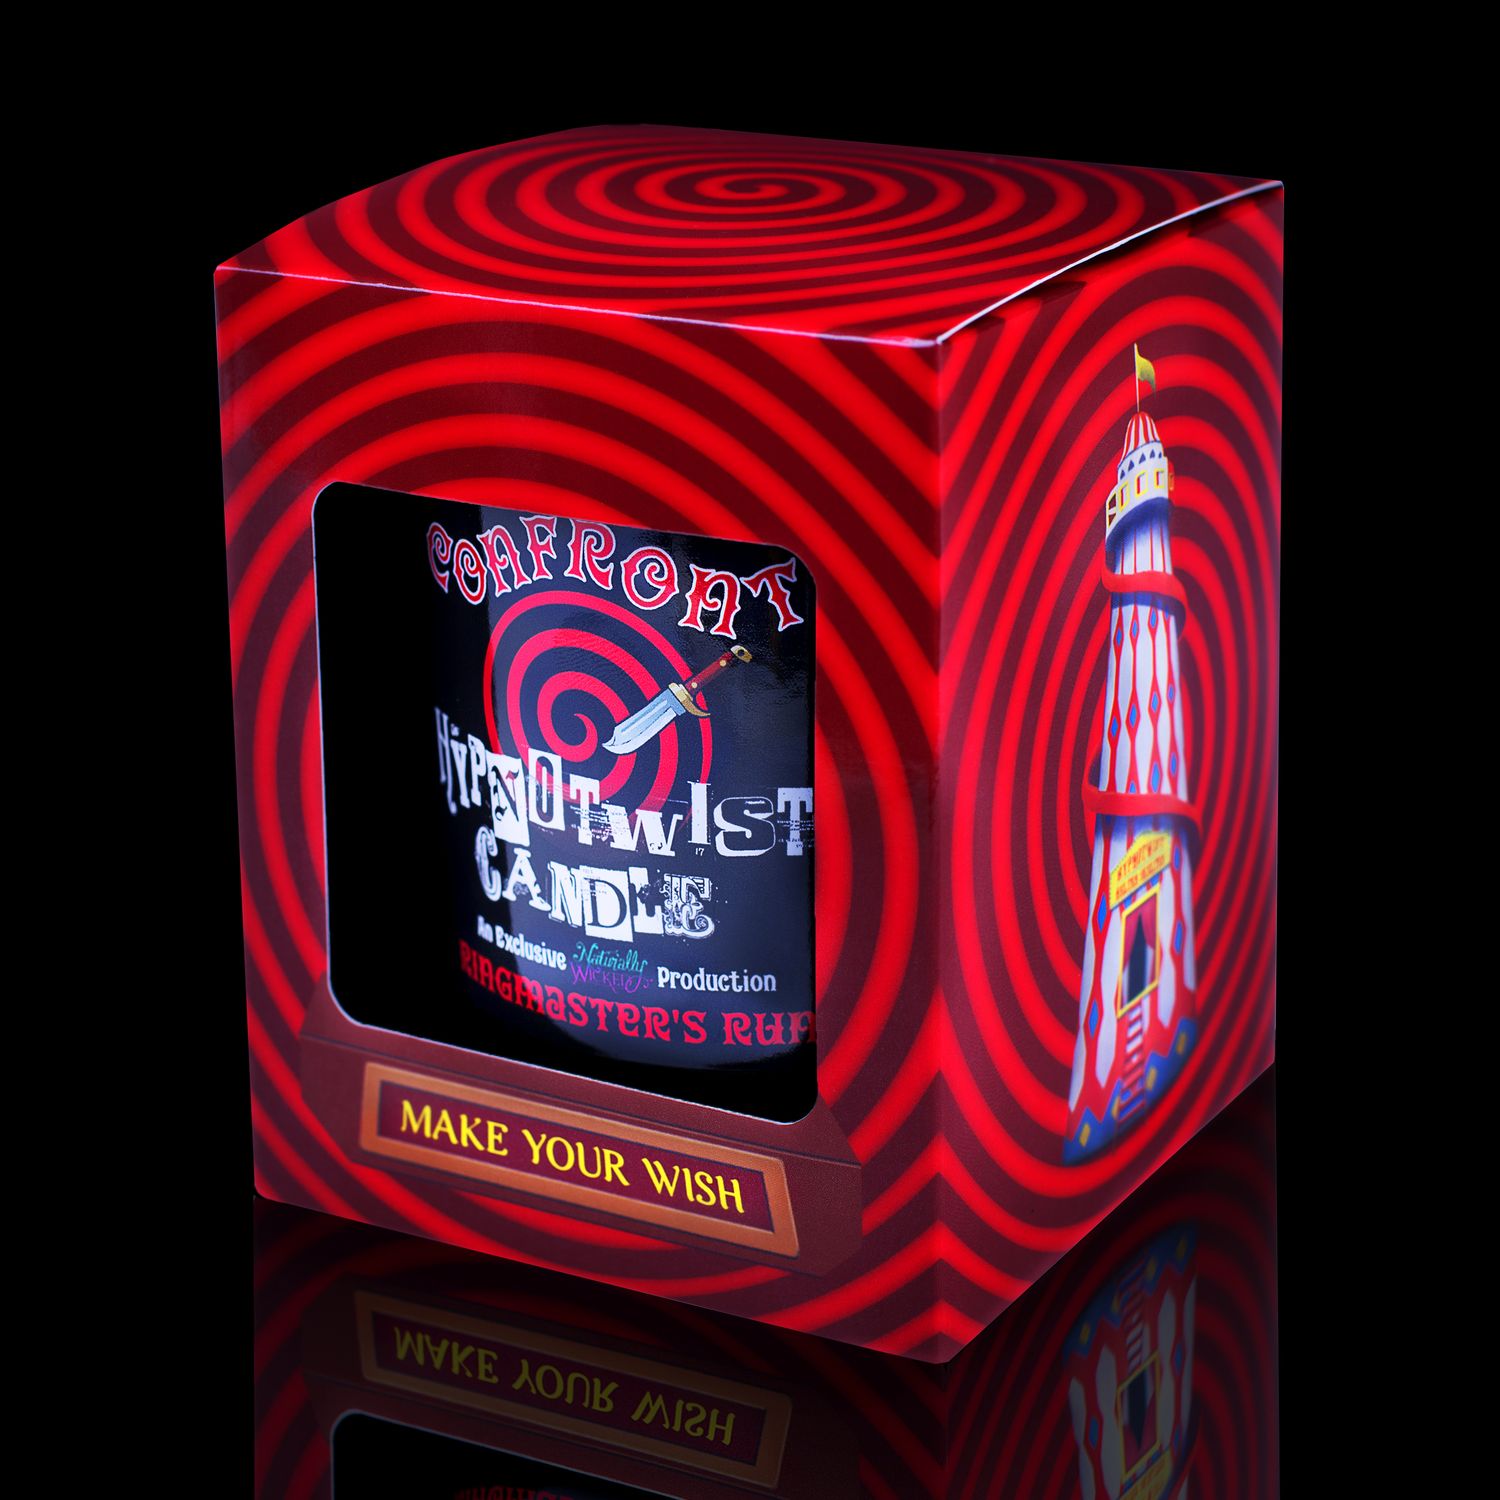 Side View Of The Naturally Wicked Hypnotwist Confront Candle, Plant-based Soy Red Wax Scented With Ringmaster's Rum, Including A Zebra Red Crystal Spinning Top, Mirrored Lid & Red Circus Hypnotic Gift Box